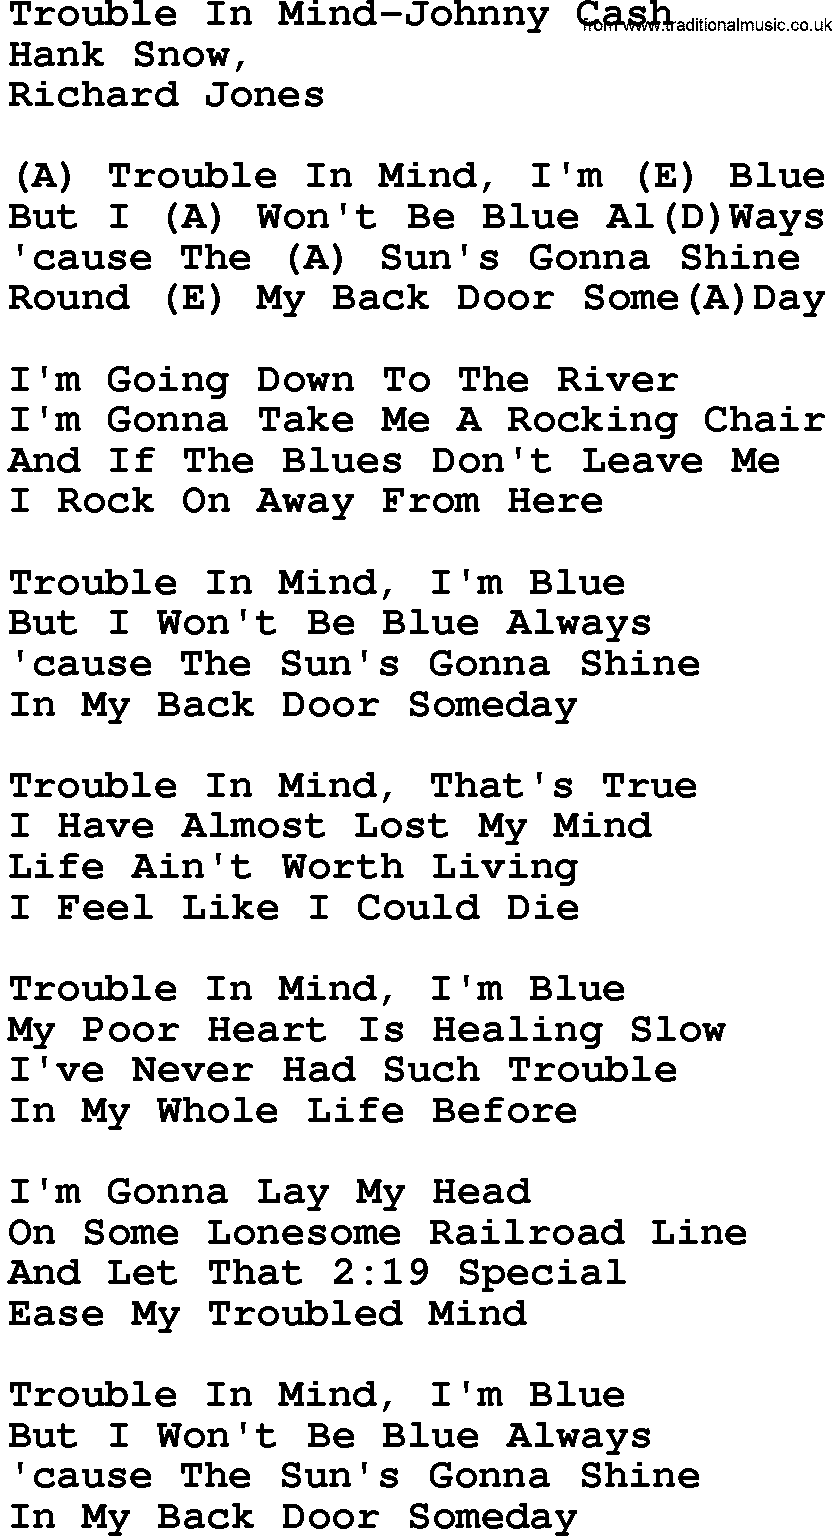 Country music song: Trouble In Mind-Johnny Cash lyrics and chords